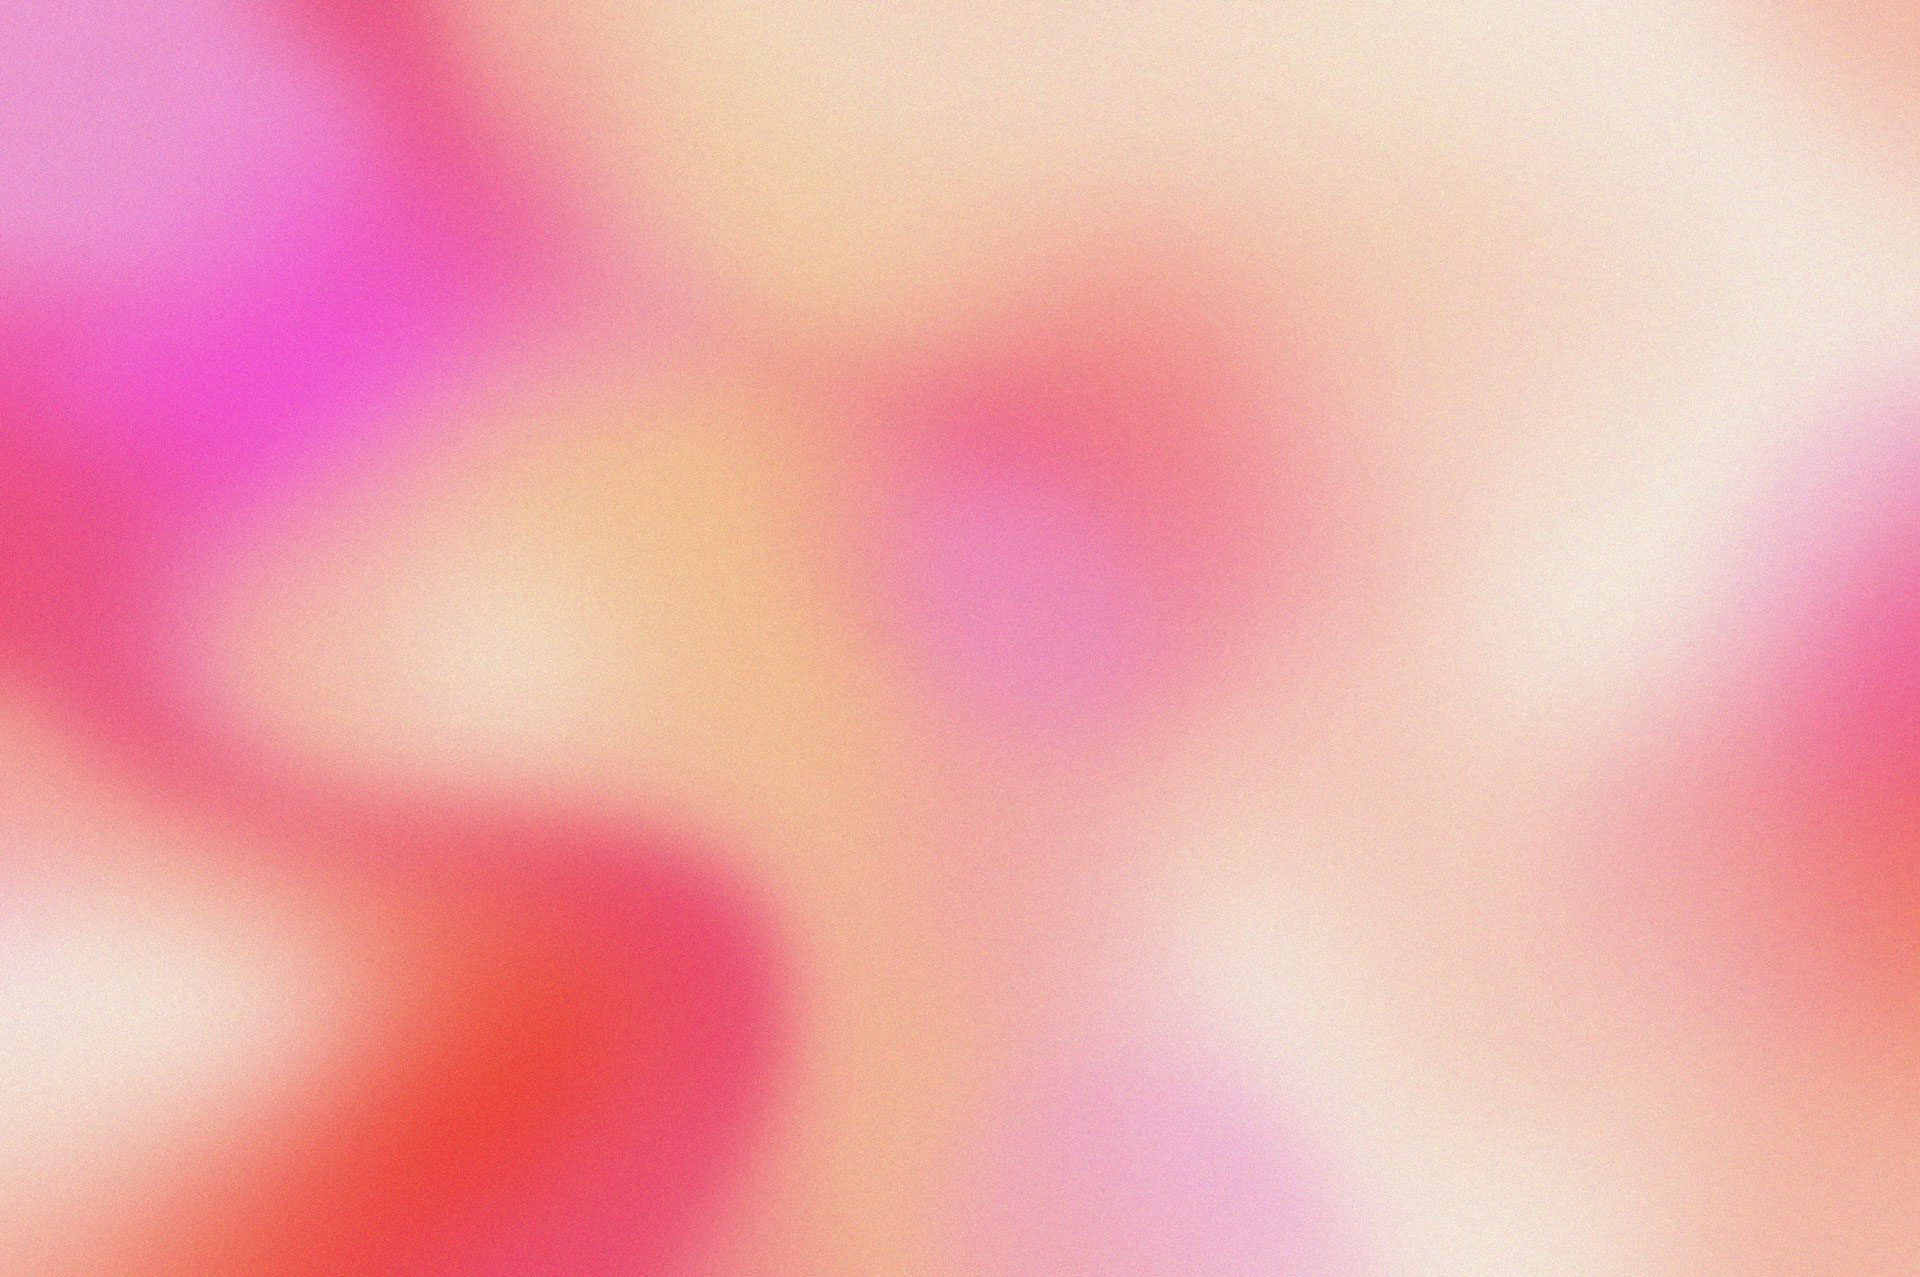 Abstract gradient featuring pink and yellow hues.